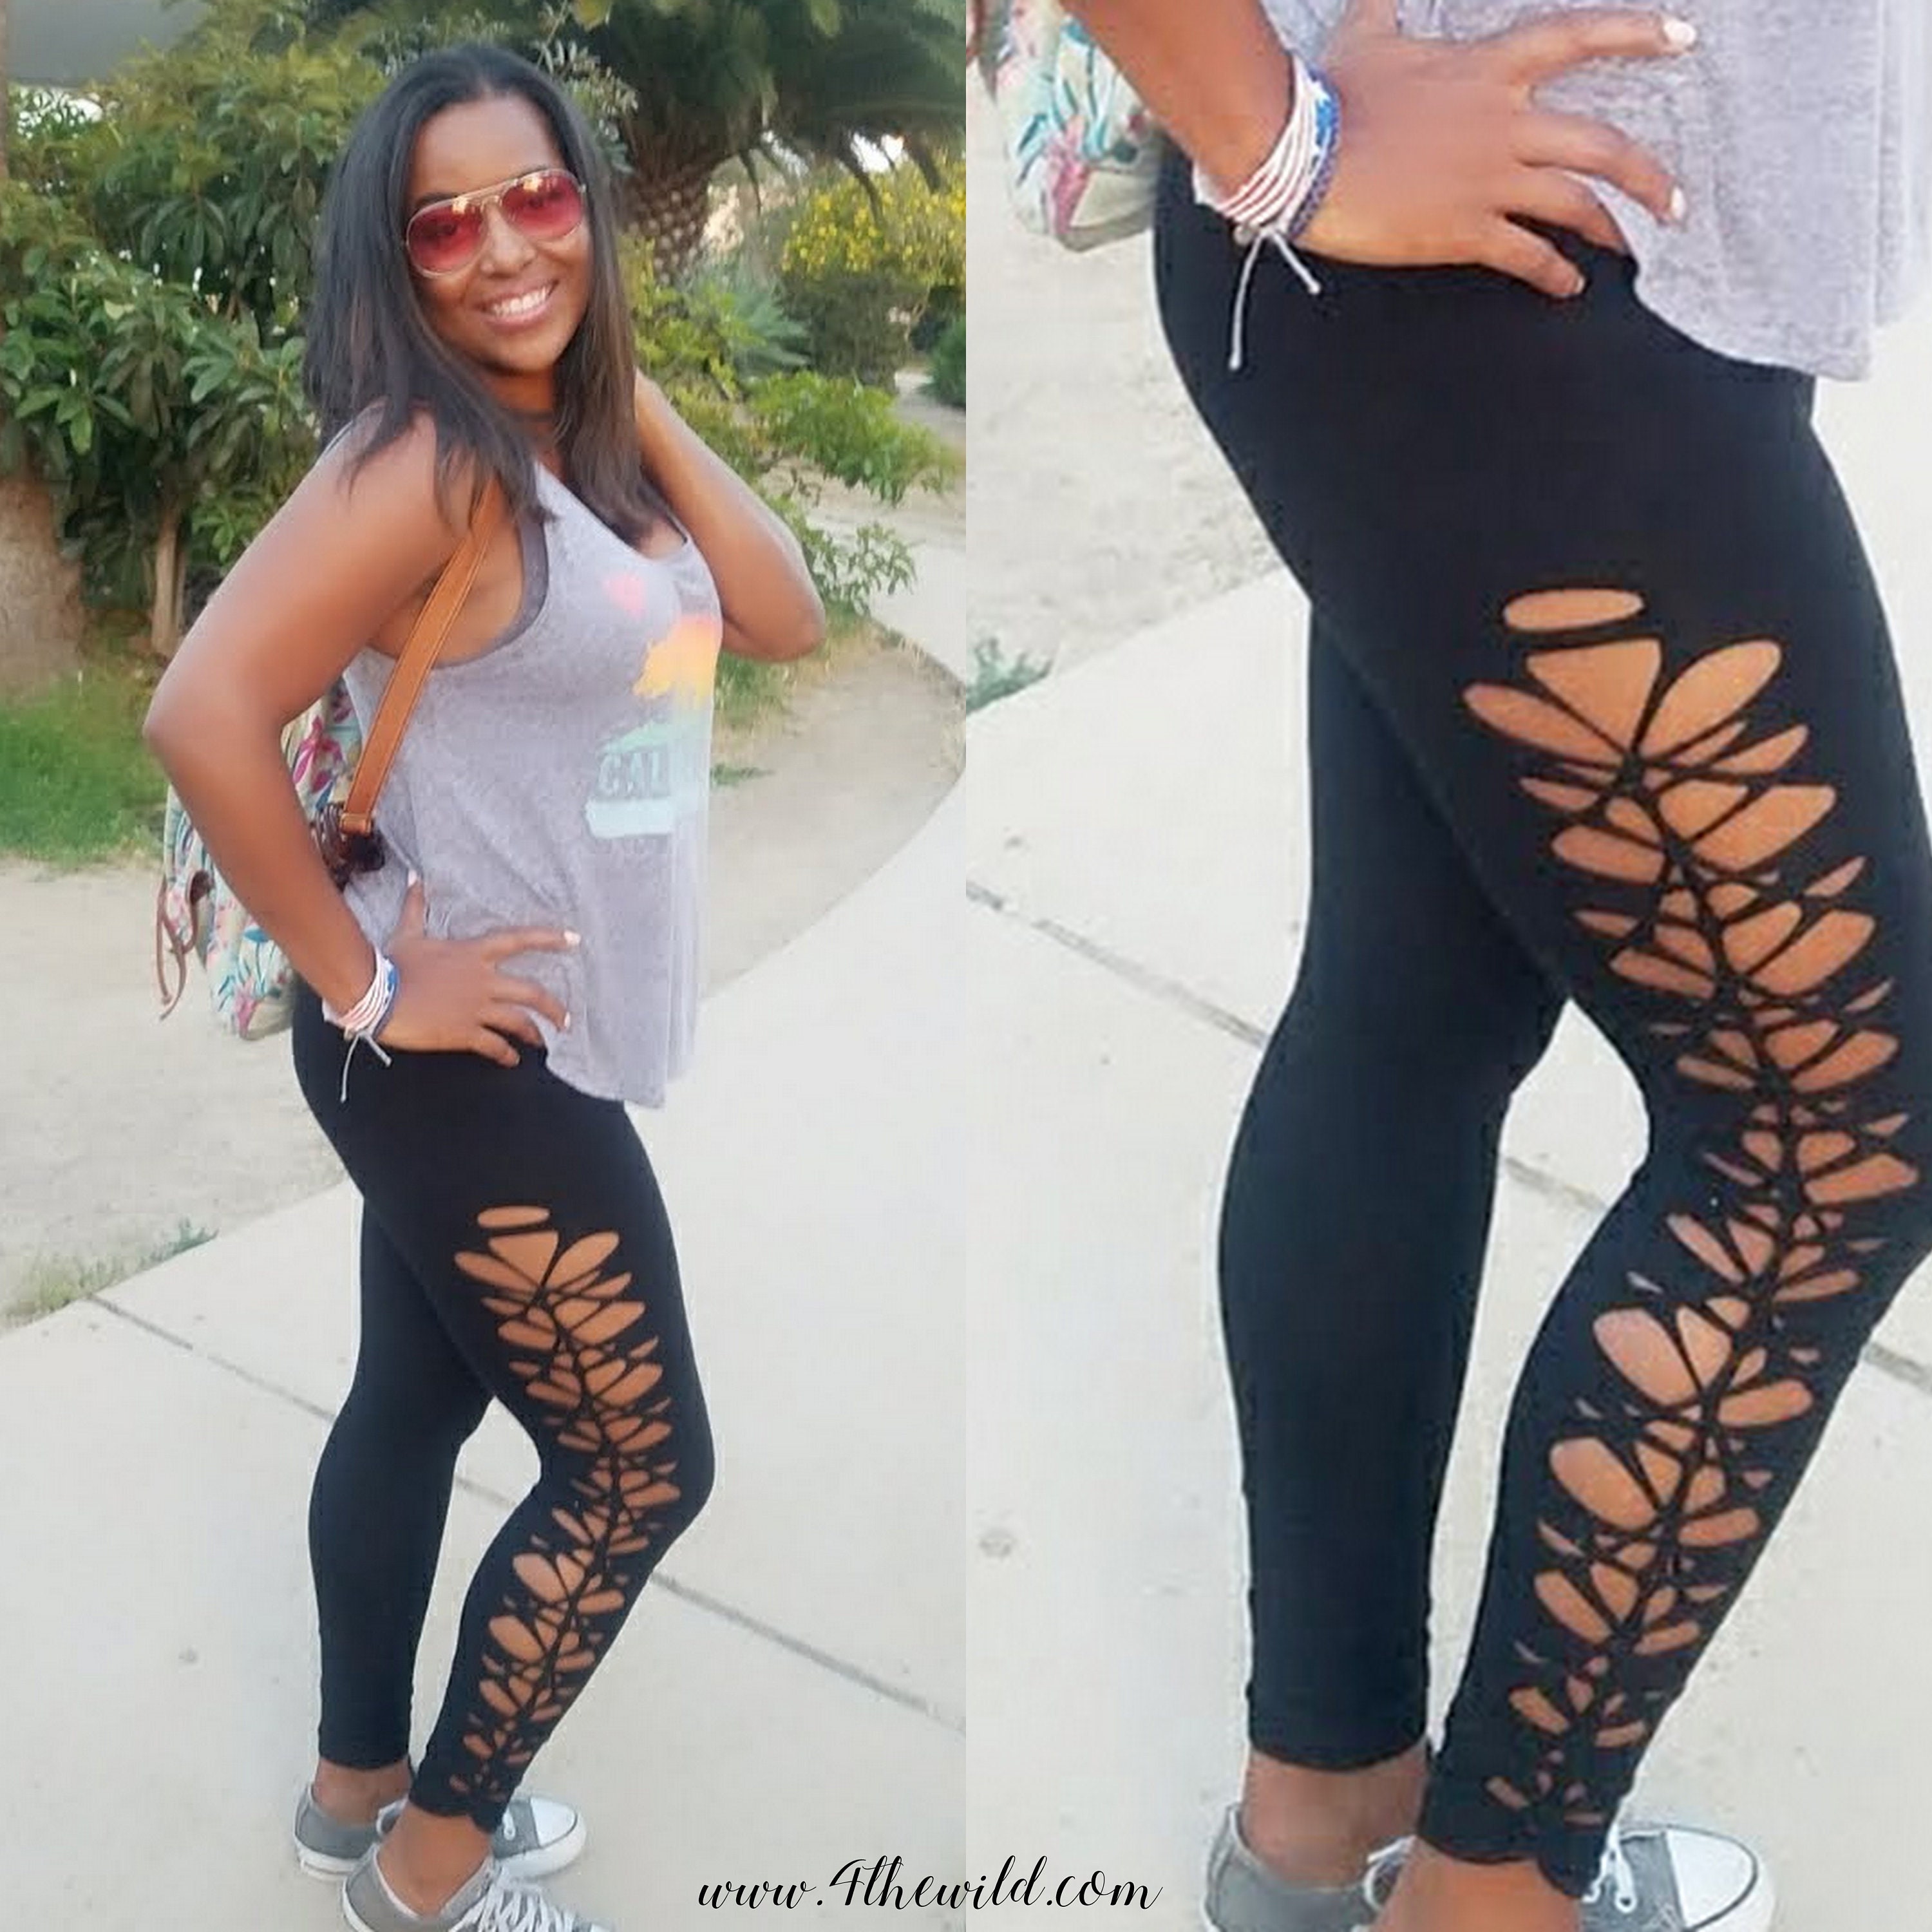 Black Yoga Leggings Braided Down the Sides Available in Plus Sizes